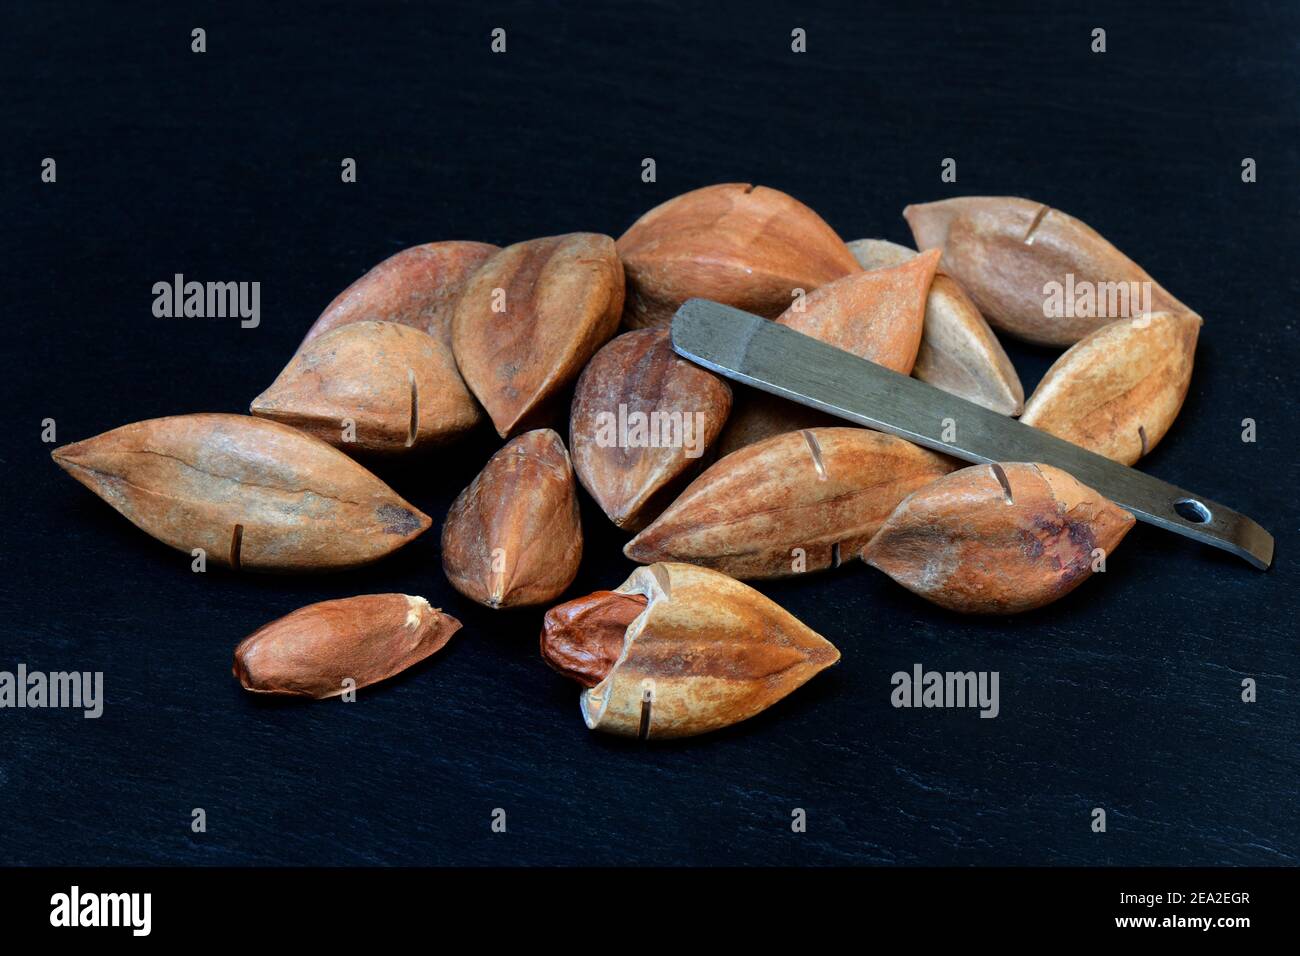 Pre-scored and opened pilinuts with pili crackers ( Canarium ovatum) Stock Photo